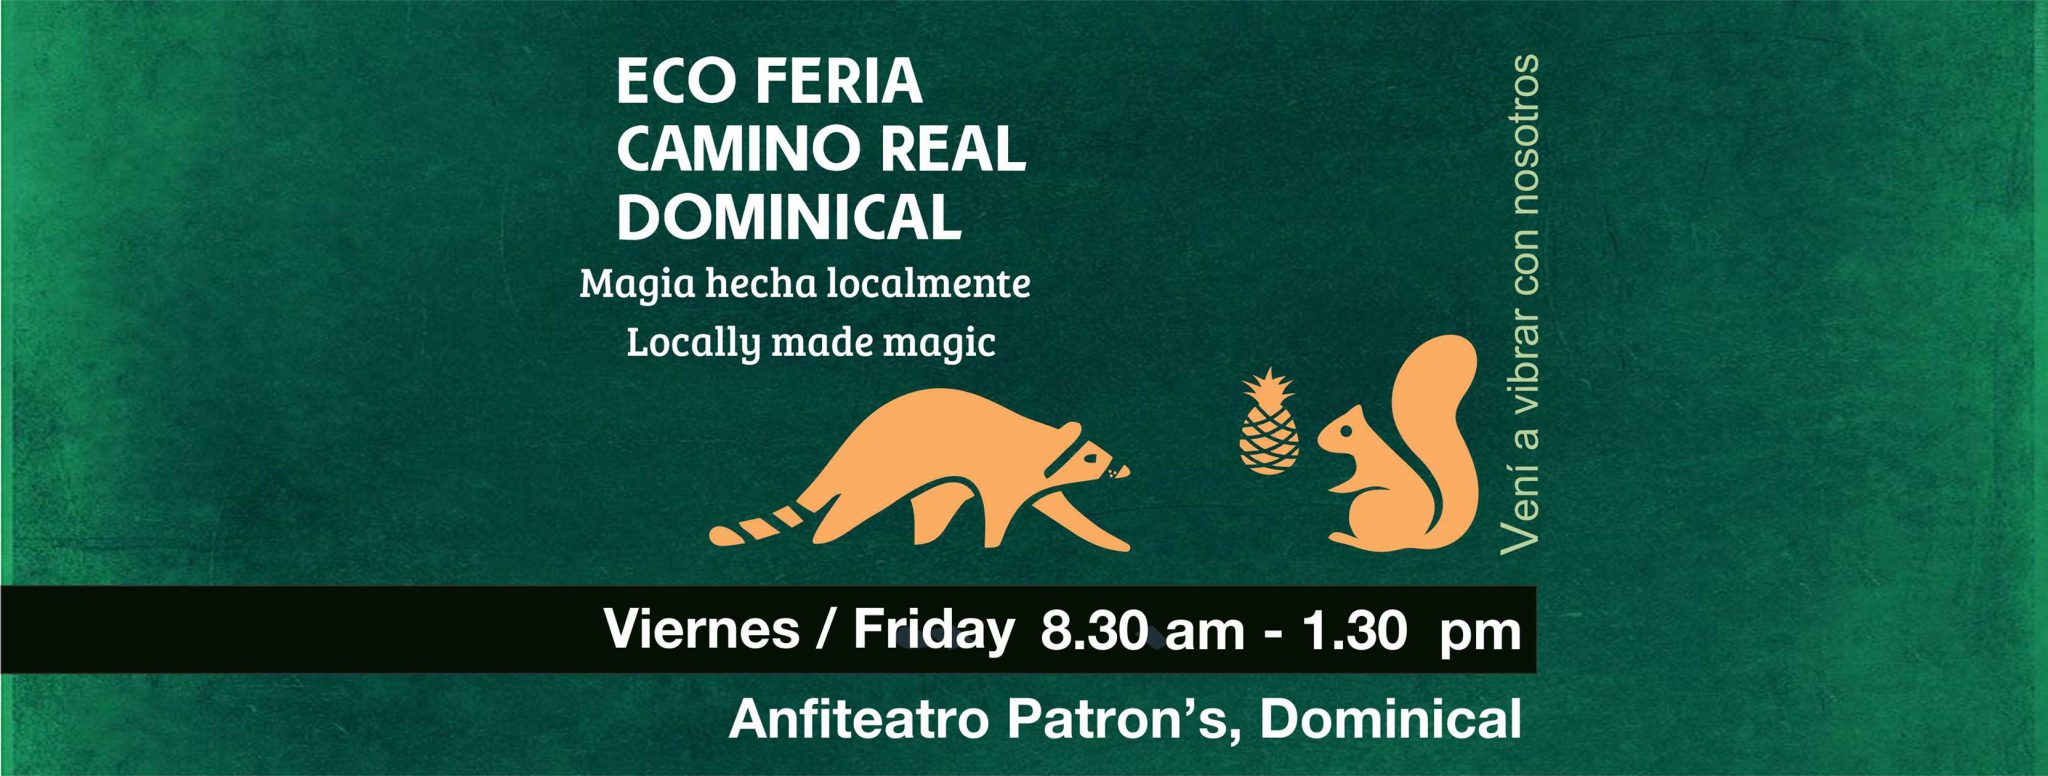 Shop Local at the Friday “Eco Feria” Organic Farmer’s Market in Downtown Dominical